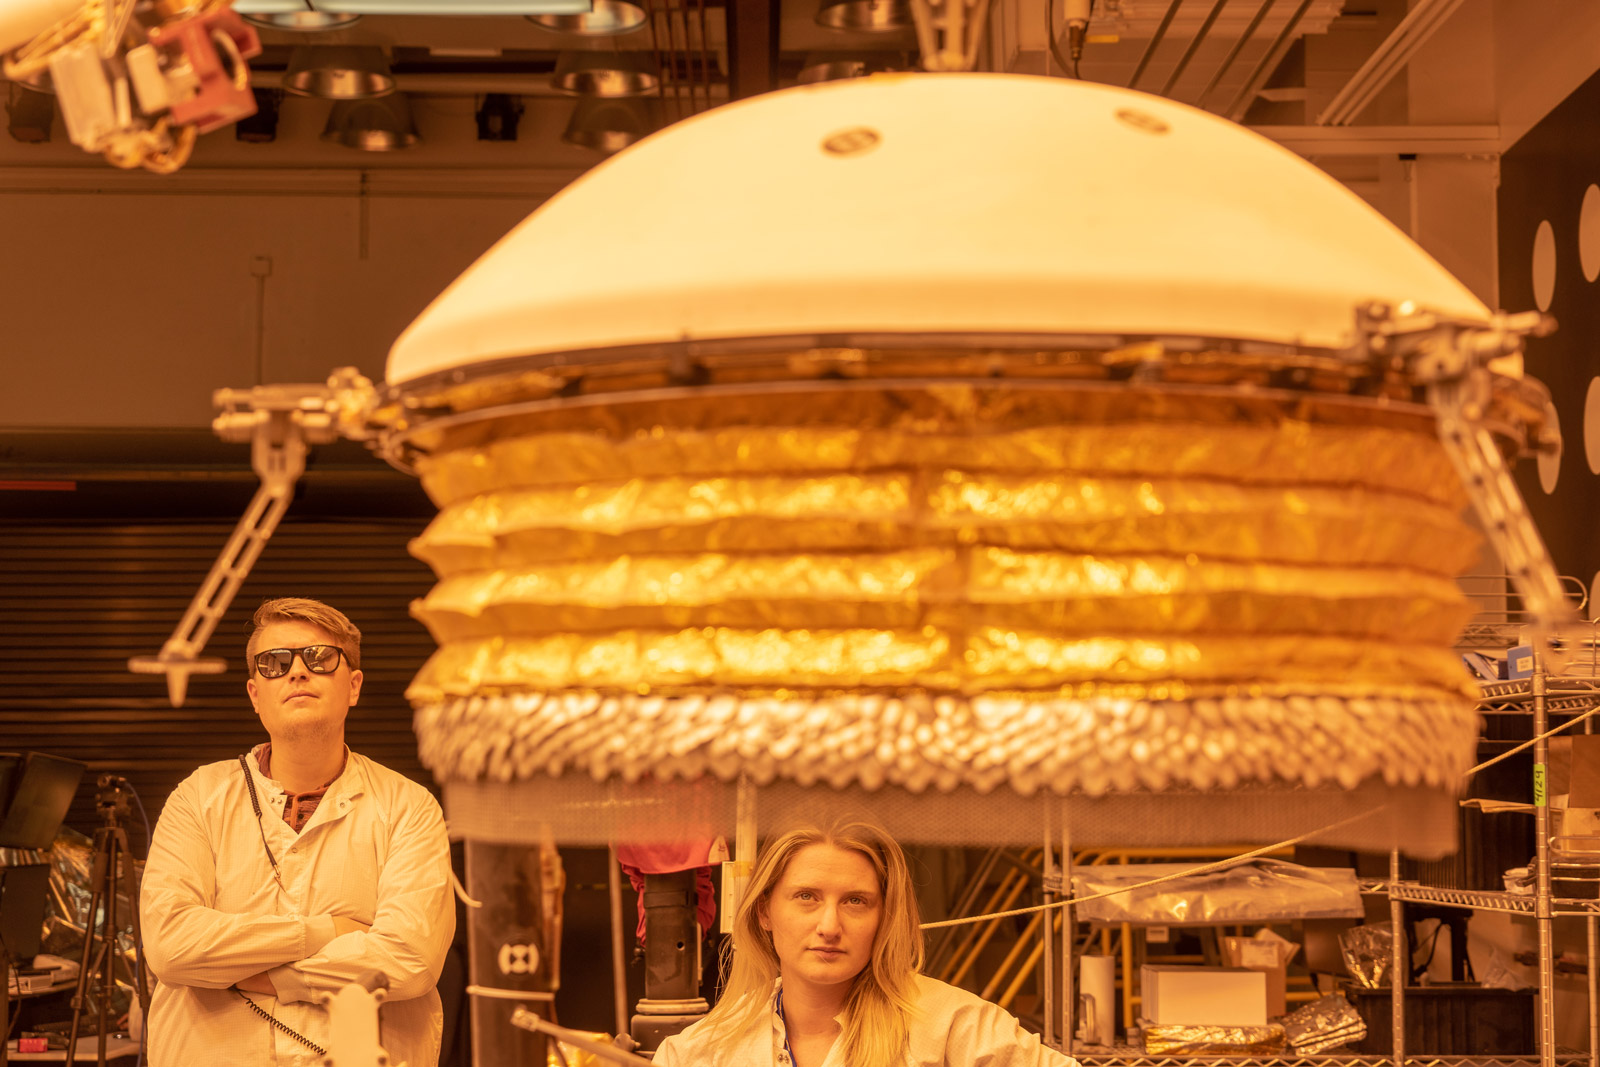 ForeSight, a fully functional, full-size model of NASA's InSight lander, practices deploying a model of the lander's Wind and Thermal Shield while engineers Phil Bailey (left) and Jaime Singer (center) look on. The Wind and Thermal Shield protects InSight's seismometer. This testing was done at NASA's Jet Propulsion Laboratory in Pasadena, California.